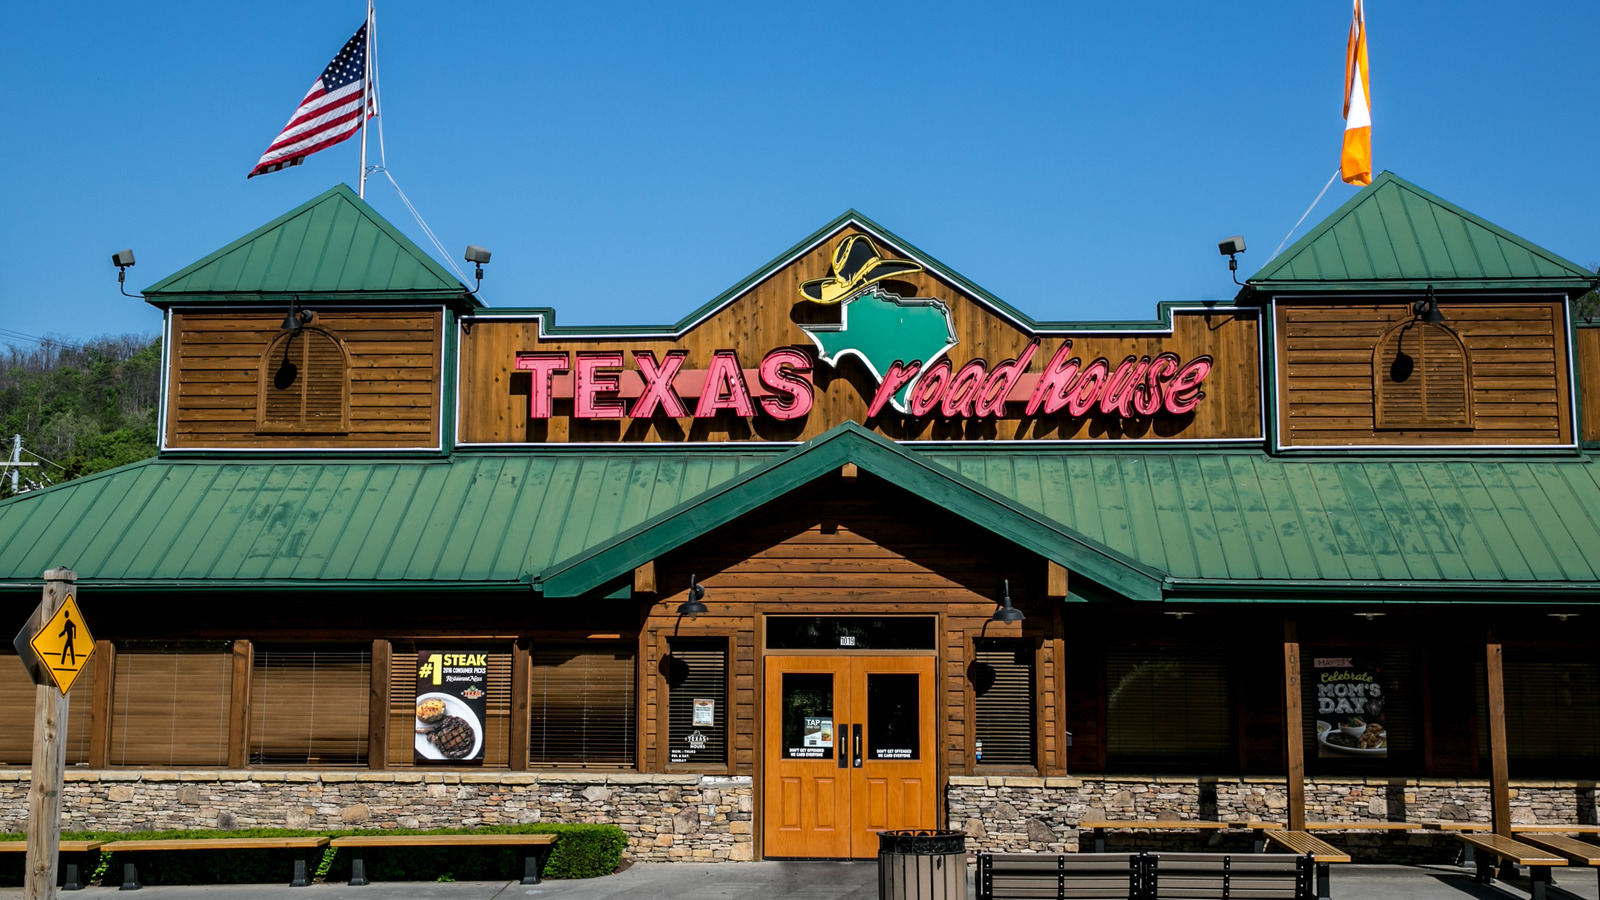 Popular Texas Roadhouse Menu Items, Ranked From Worst To Best